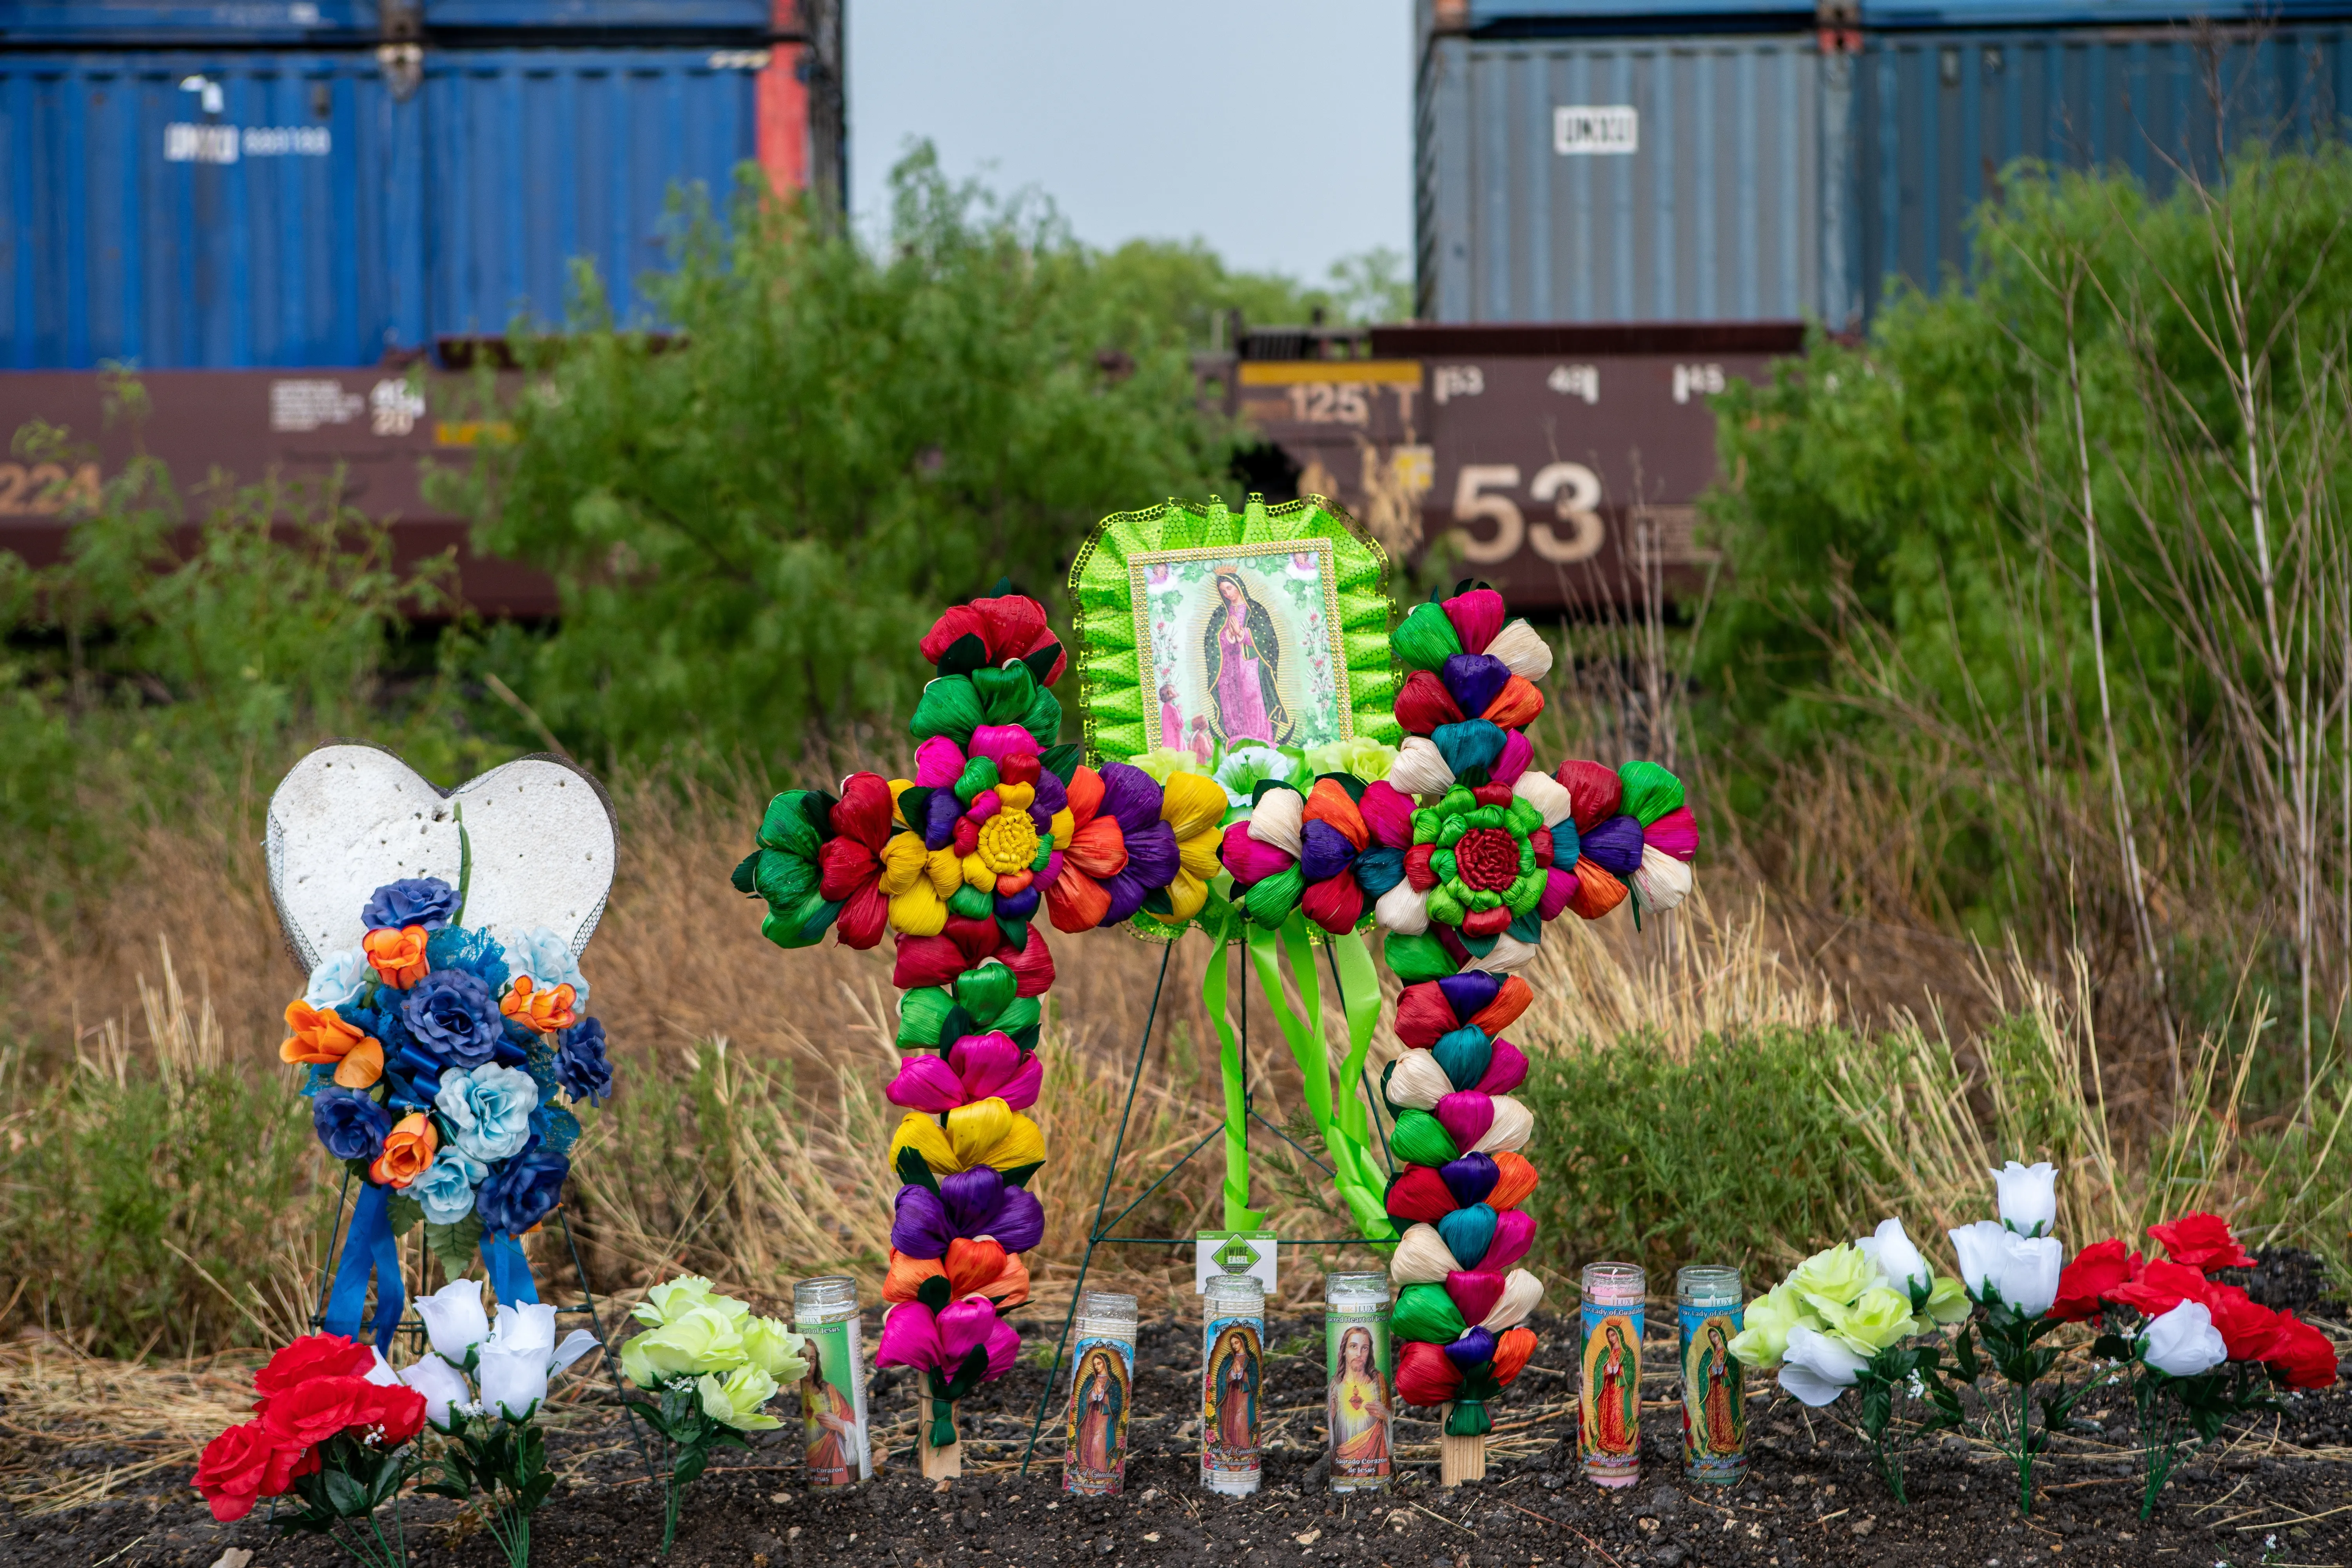 Texans brought prayer candles, bottles of water, and religious icons to a makeshift memorial at the site where 46 migrants were declared dead in San Antonio, Texas, in June 2022.?w=200&h=150